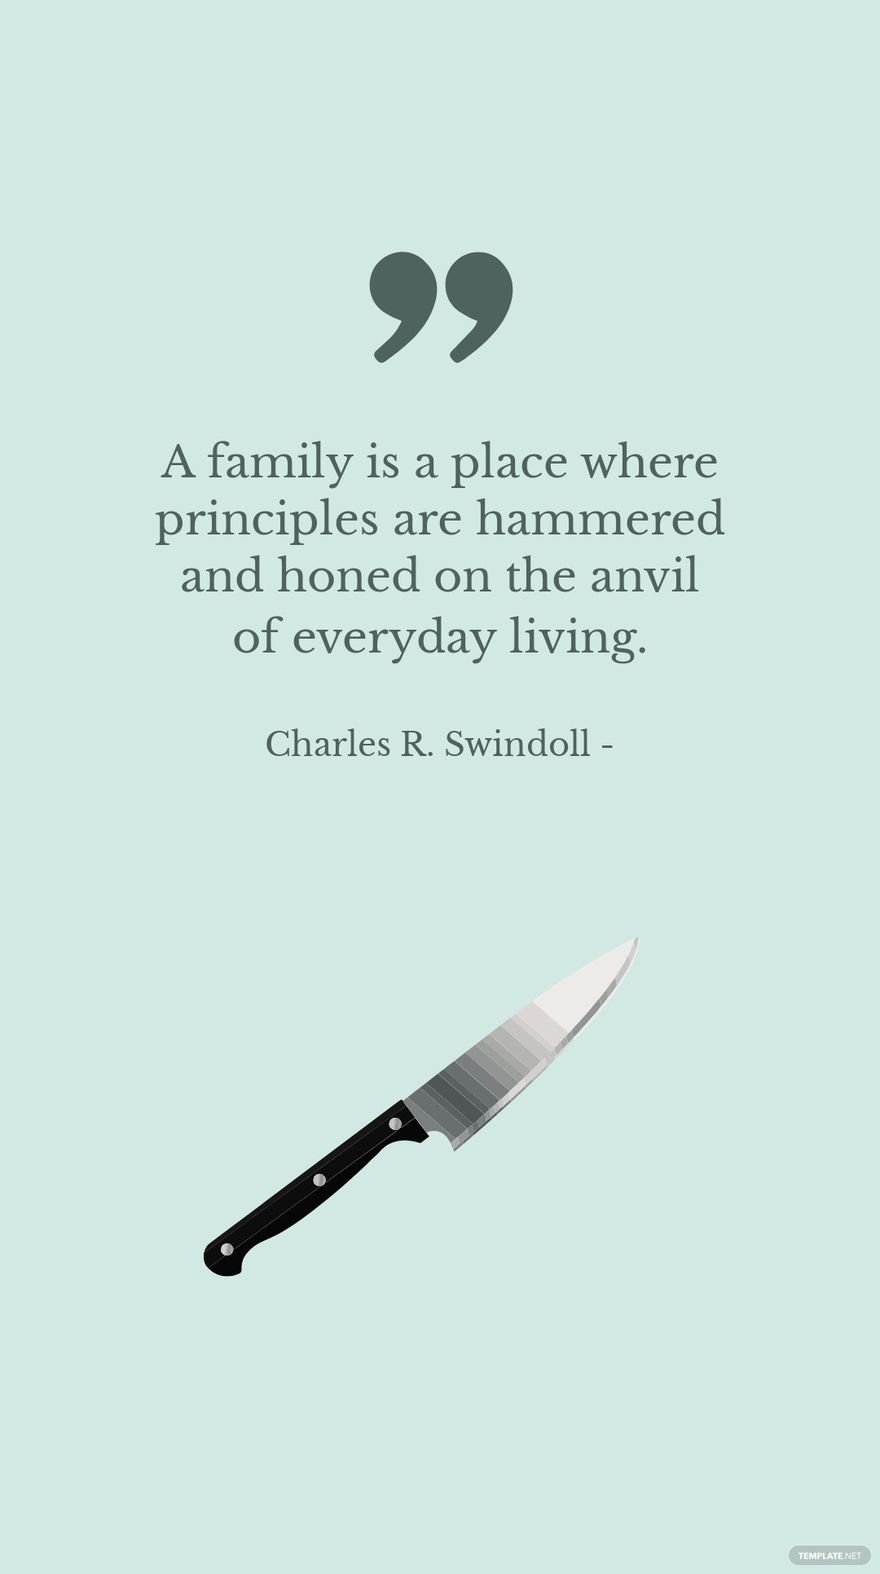 Charles R. Swindoll - A family is a place where principles are hammered and honed on the anvil of everyday living.